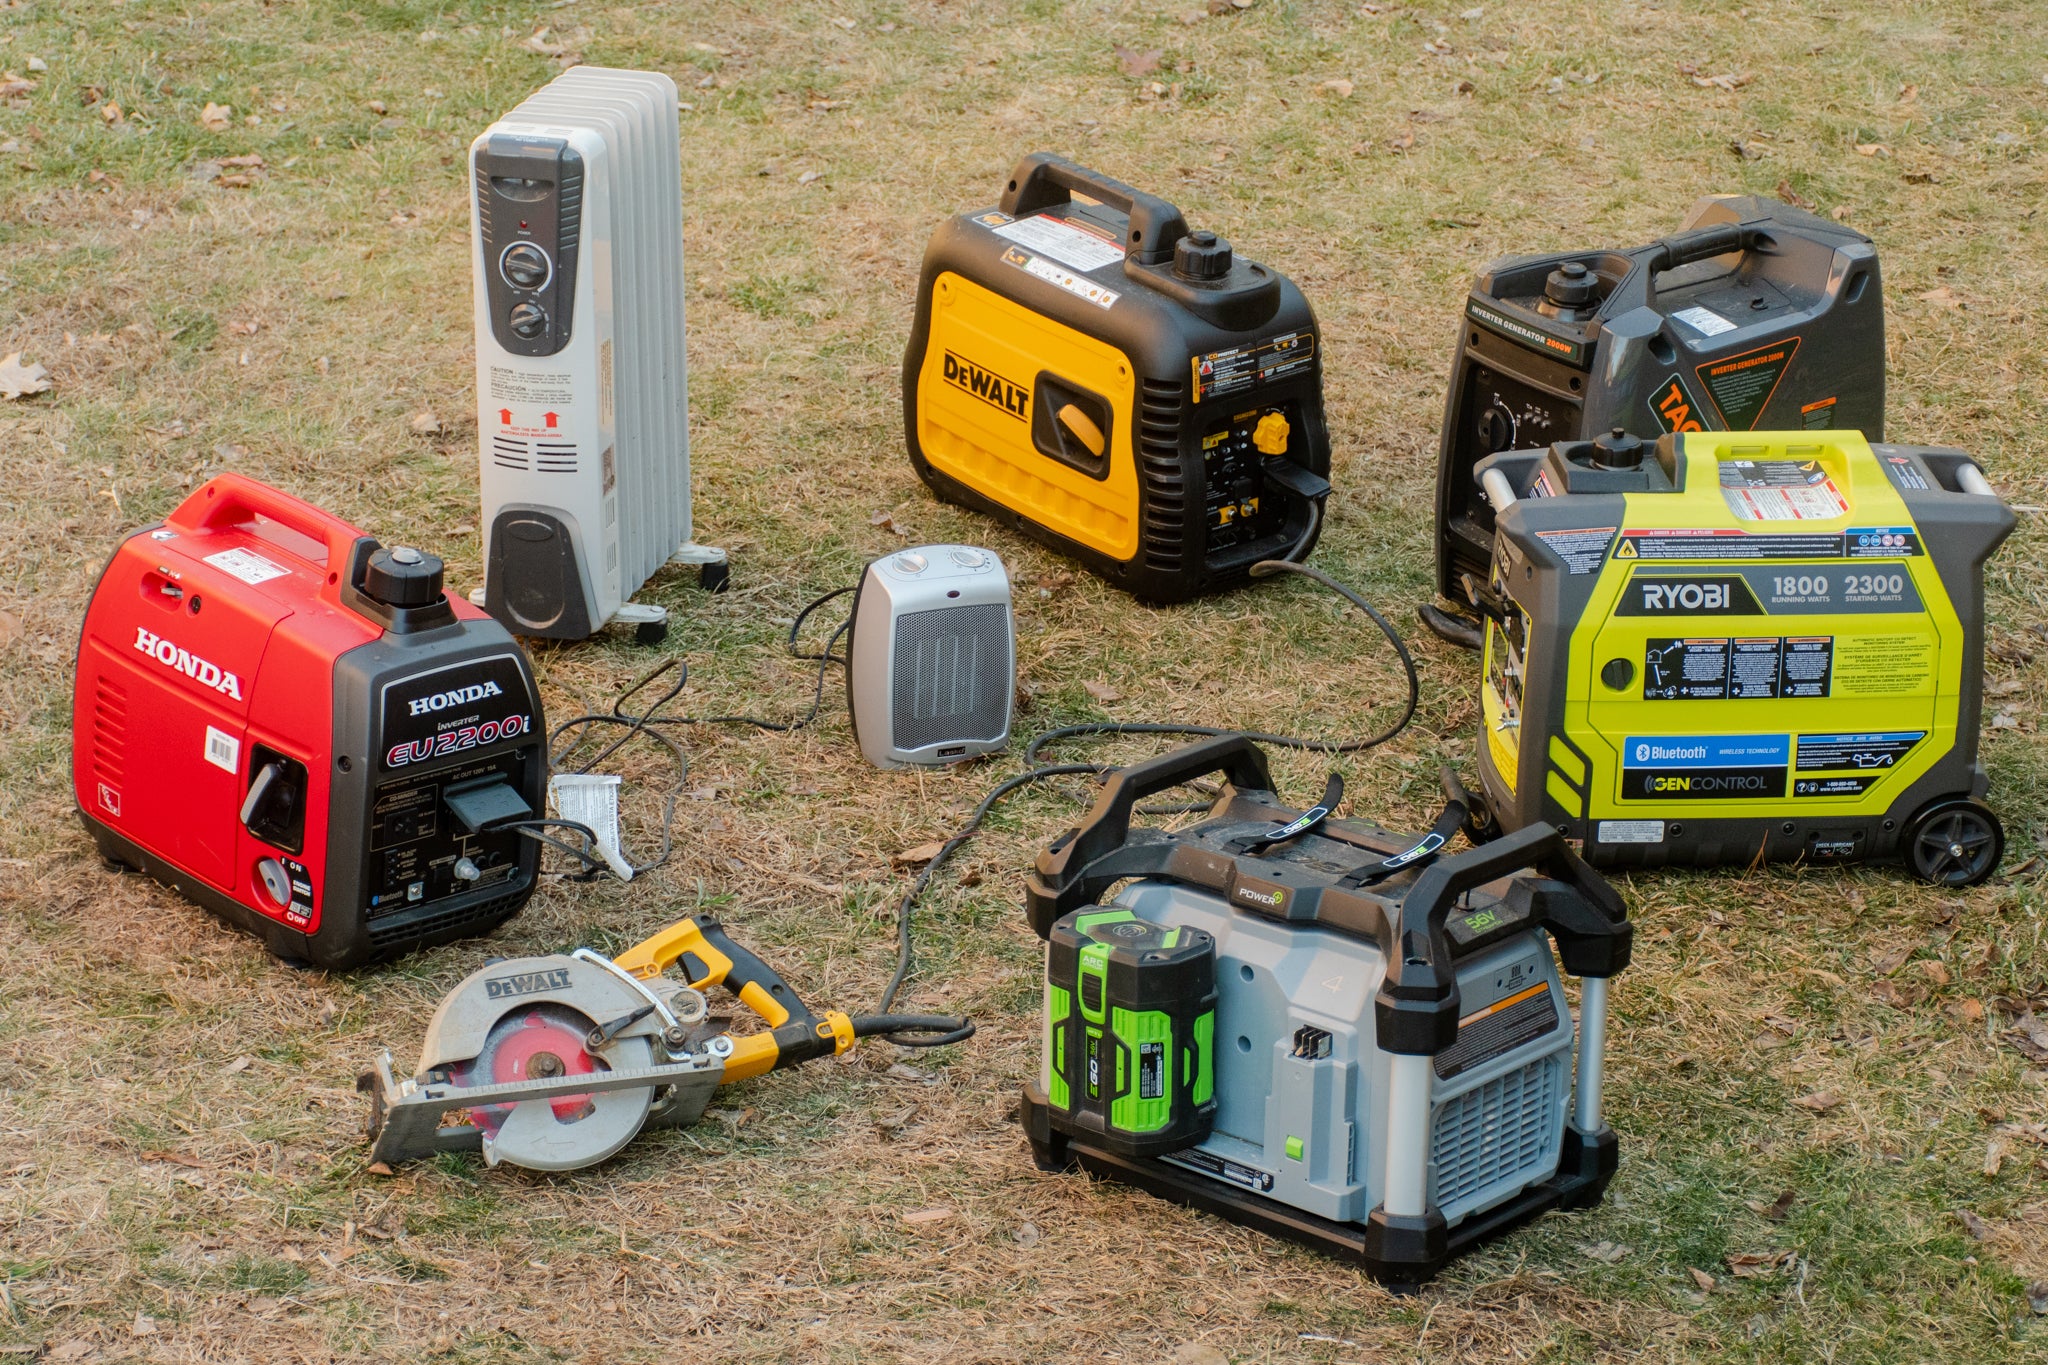 Comparisons With Other Generator Brands